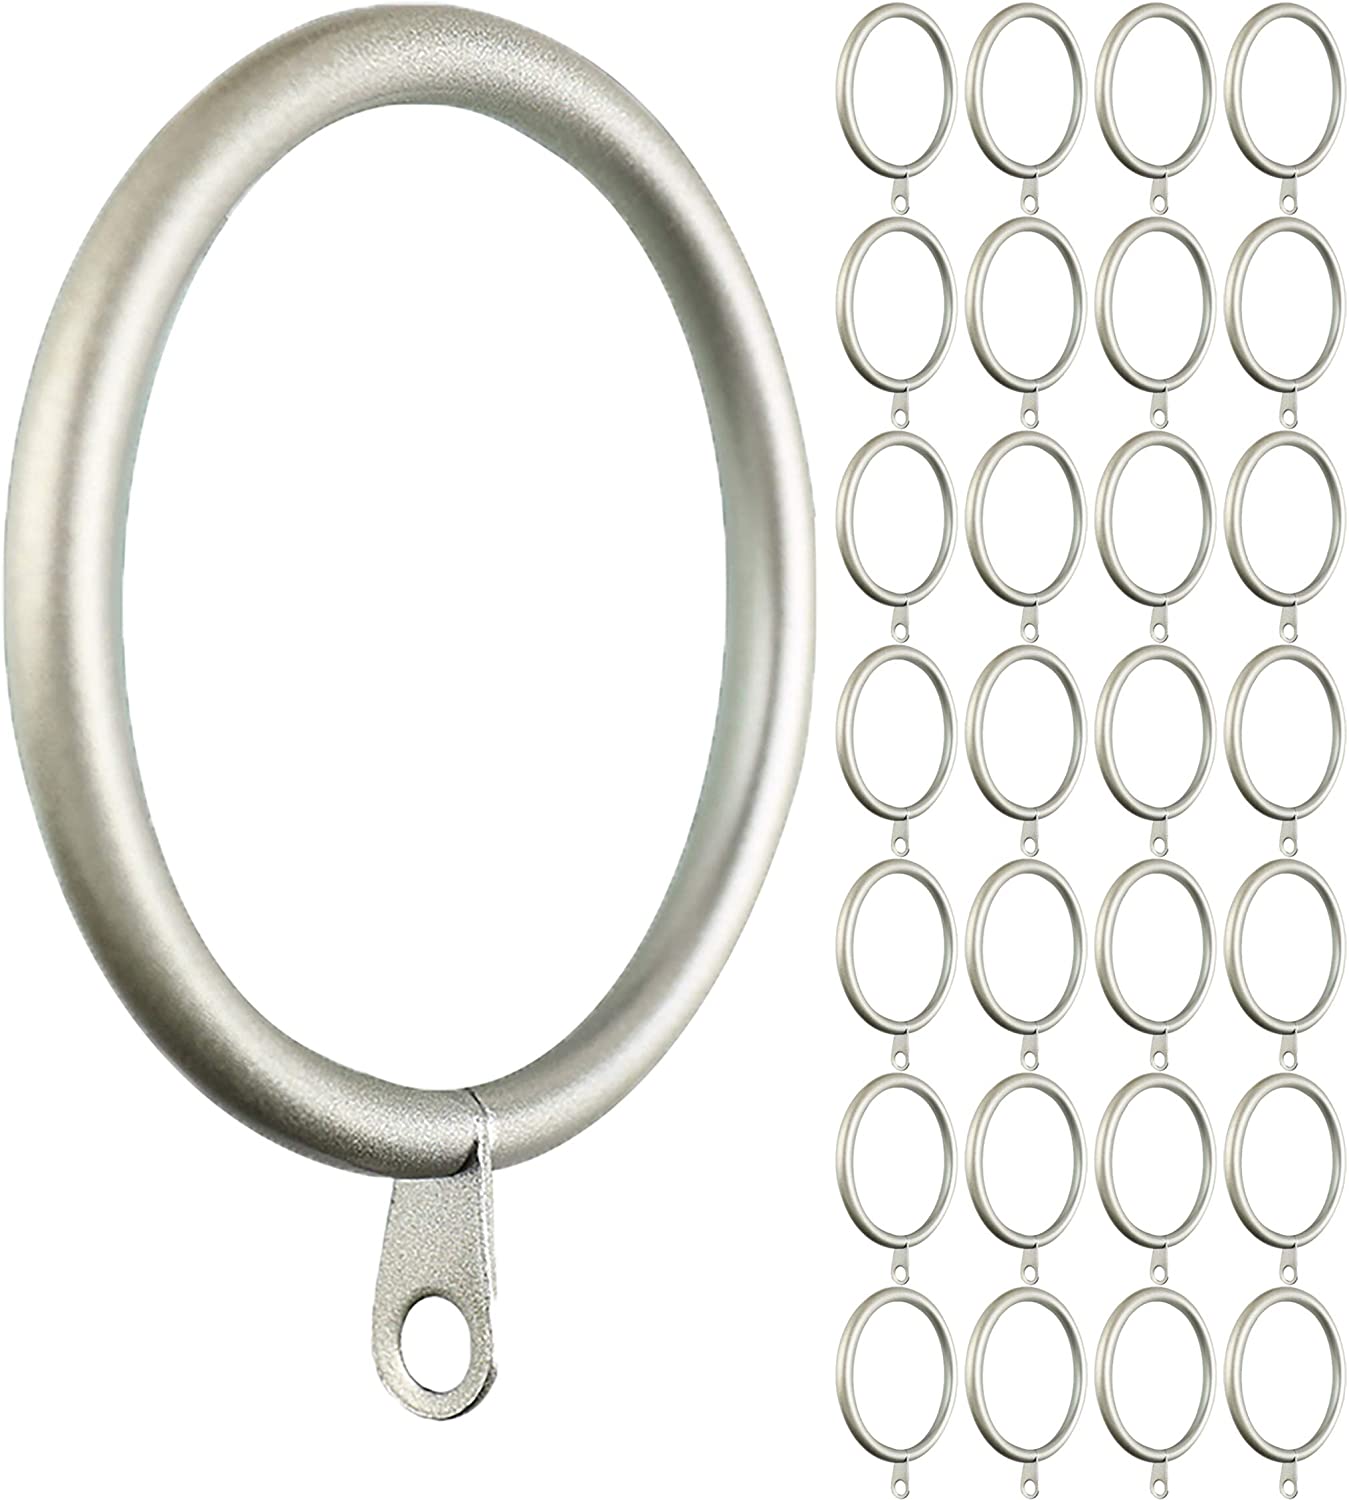 Rod Desyne Cocoa Brass Curtain Rings (Set of 10) 1926-007 - The Home Depot